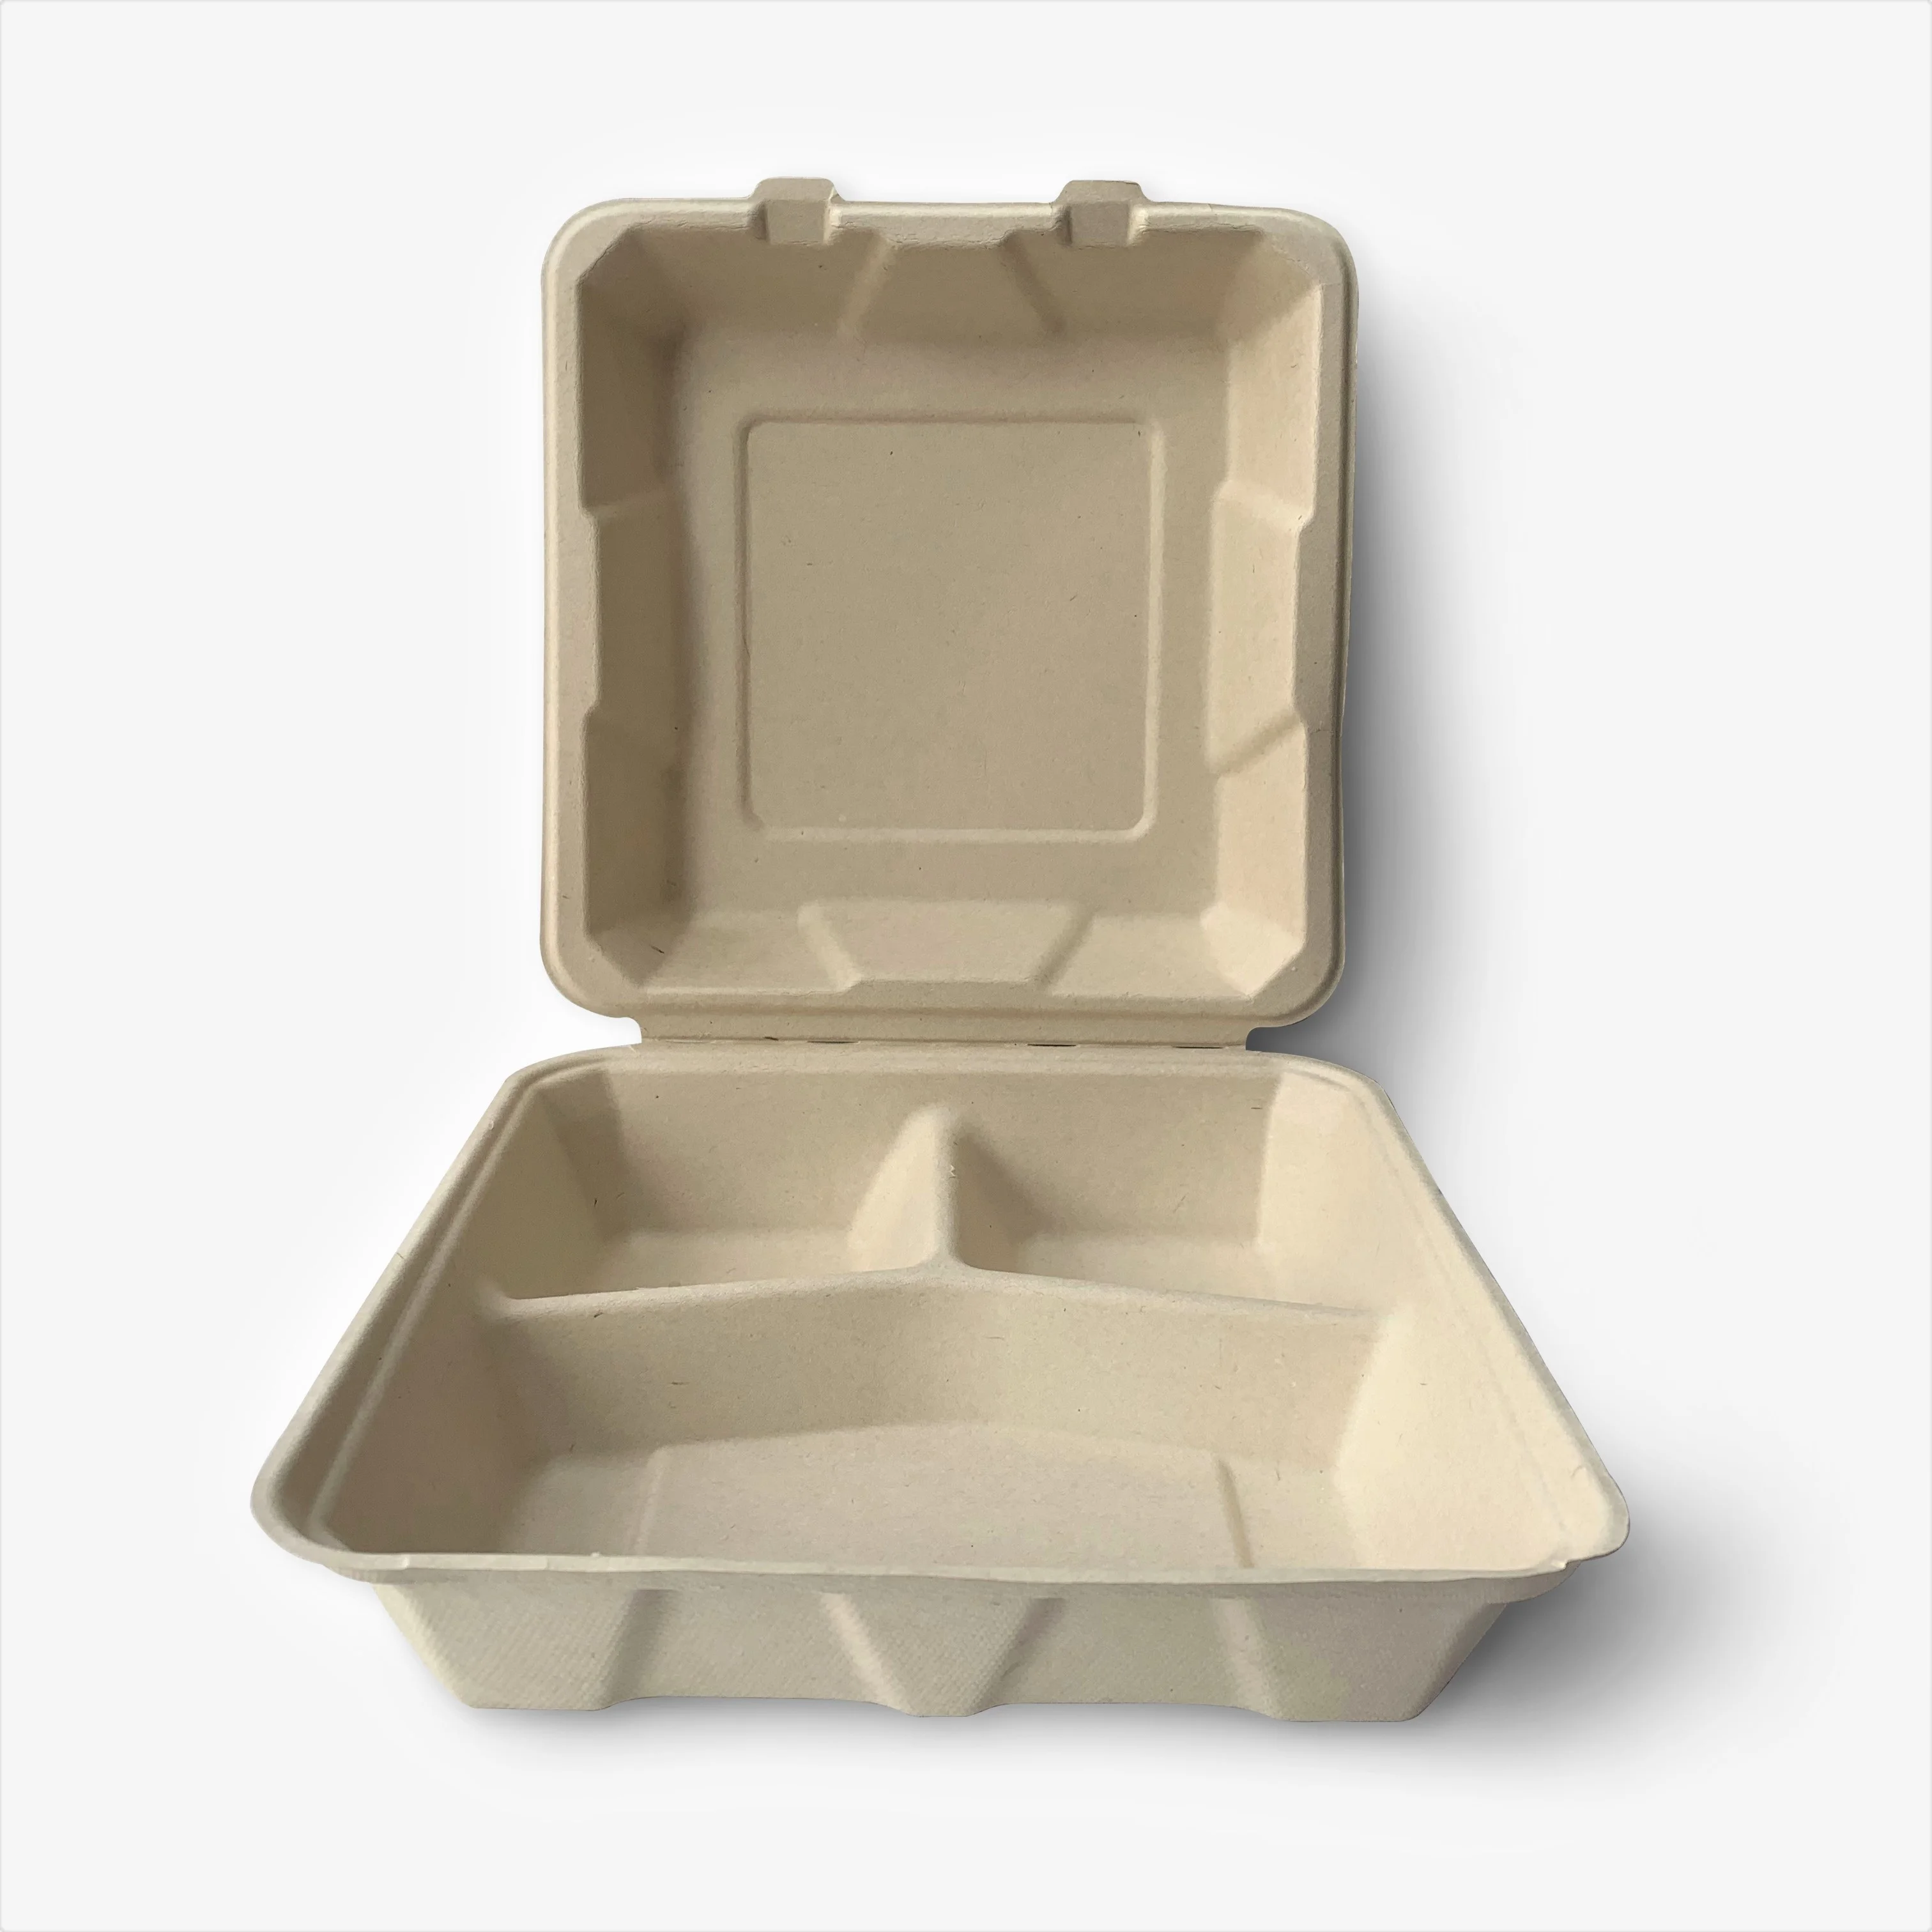 

9X9 Inch 3 Compartment Biodegradable Clamshell Food Containers Bio-Degradable Bagasse Pulp Eco Friendly Disposable Lunch Box